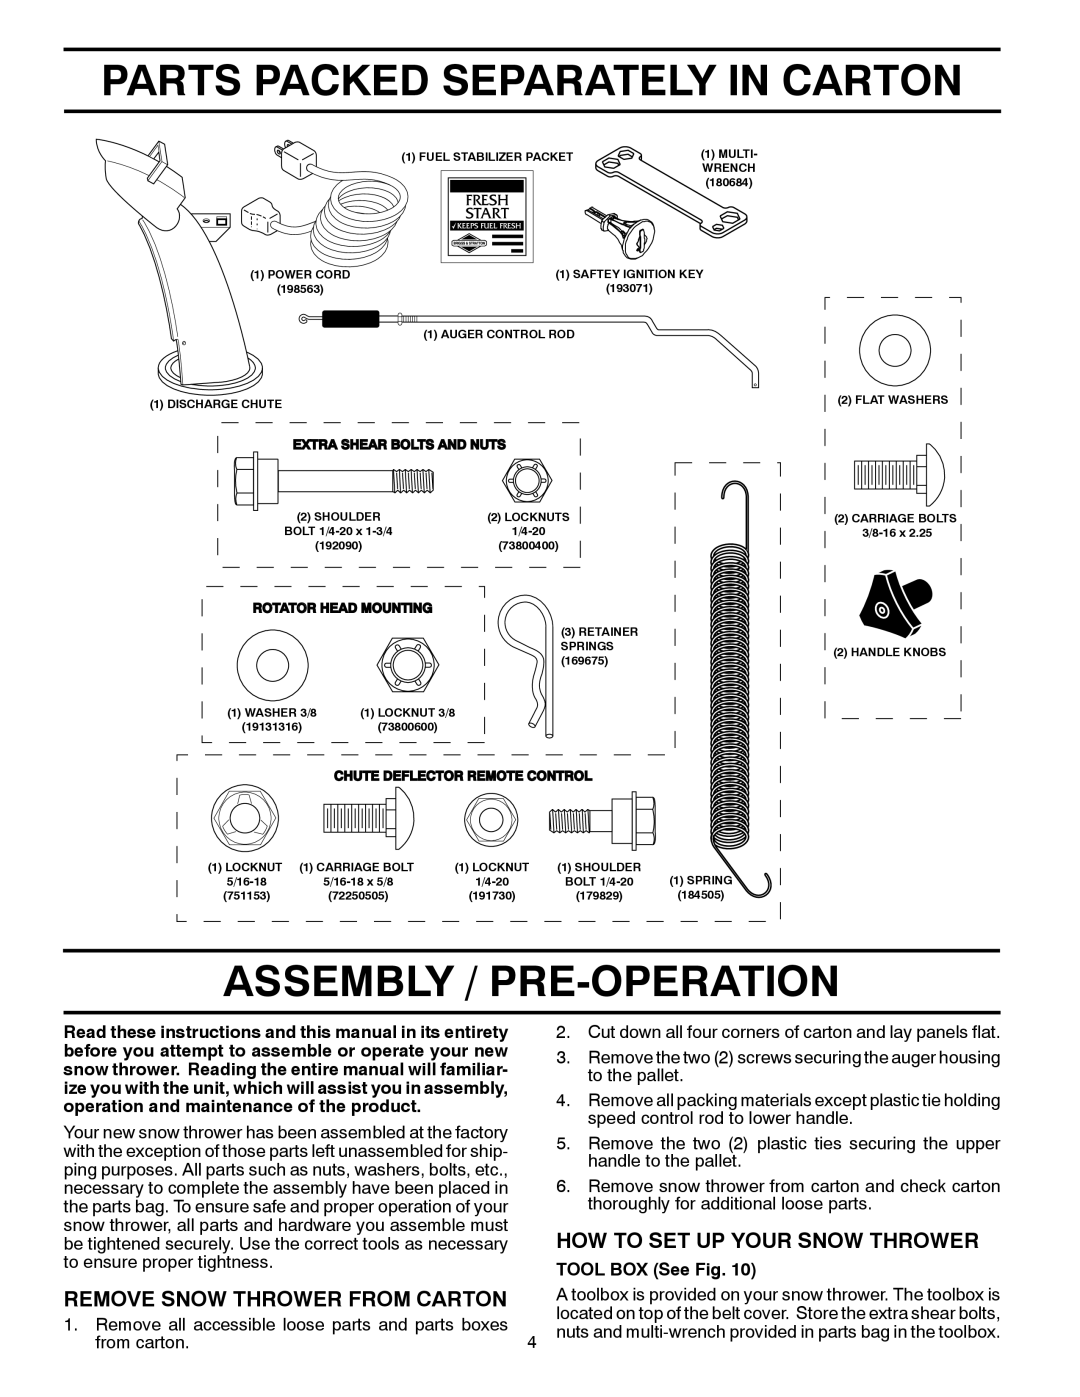 Poulan PR827ES owner manual Parts Packed Separately In Carton, Assembly / Pre-Operation, How To Set Up Your Snow Thrower 